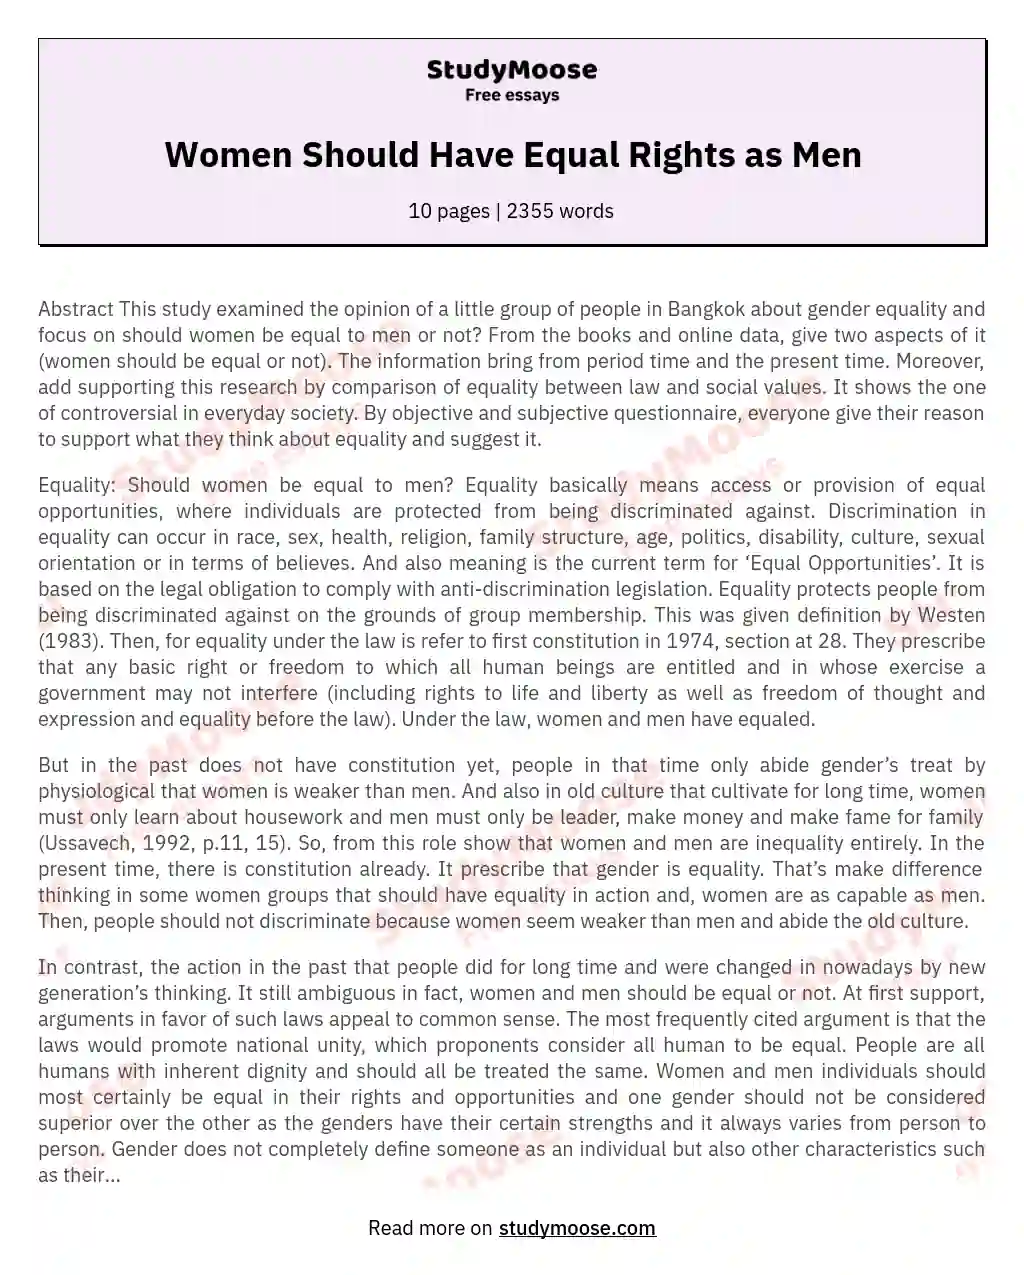 Women Should Have Equal Rights as Men essay